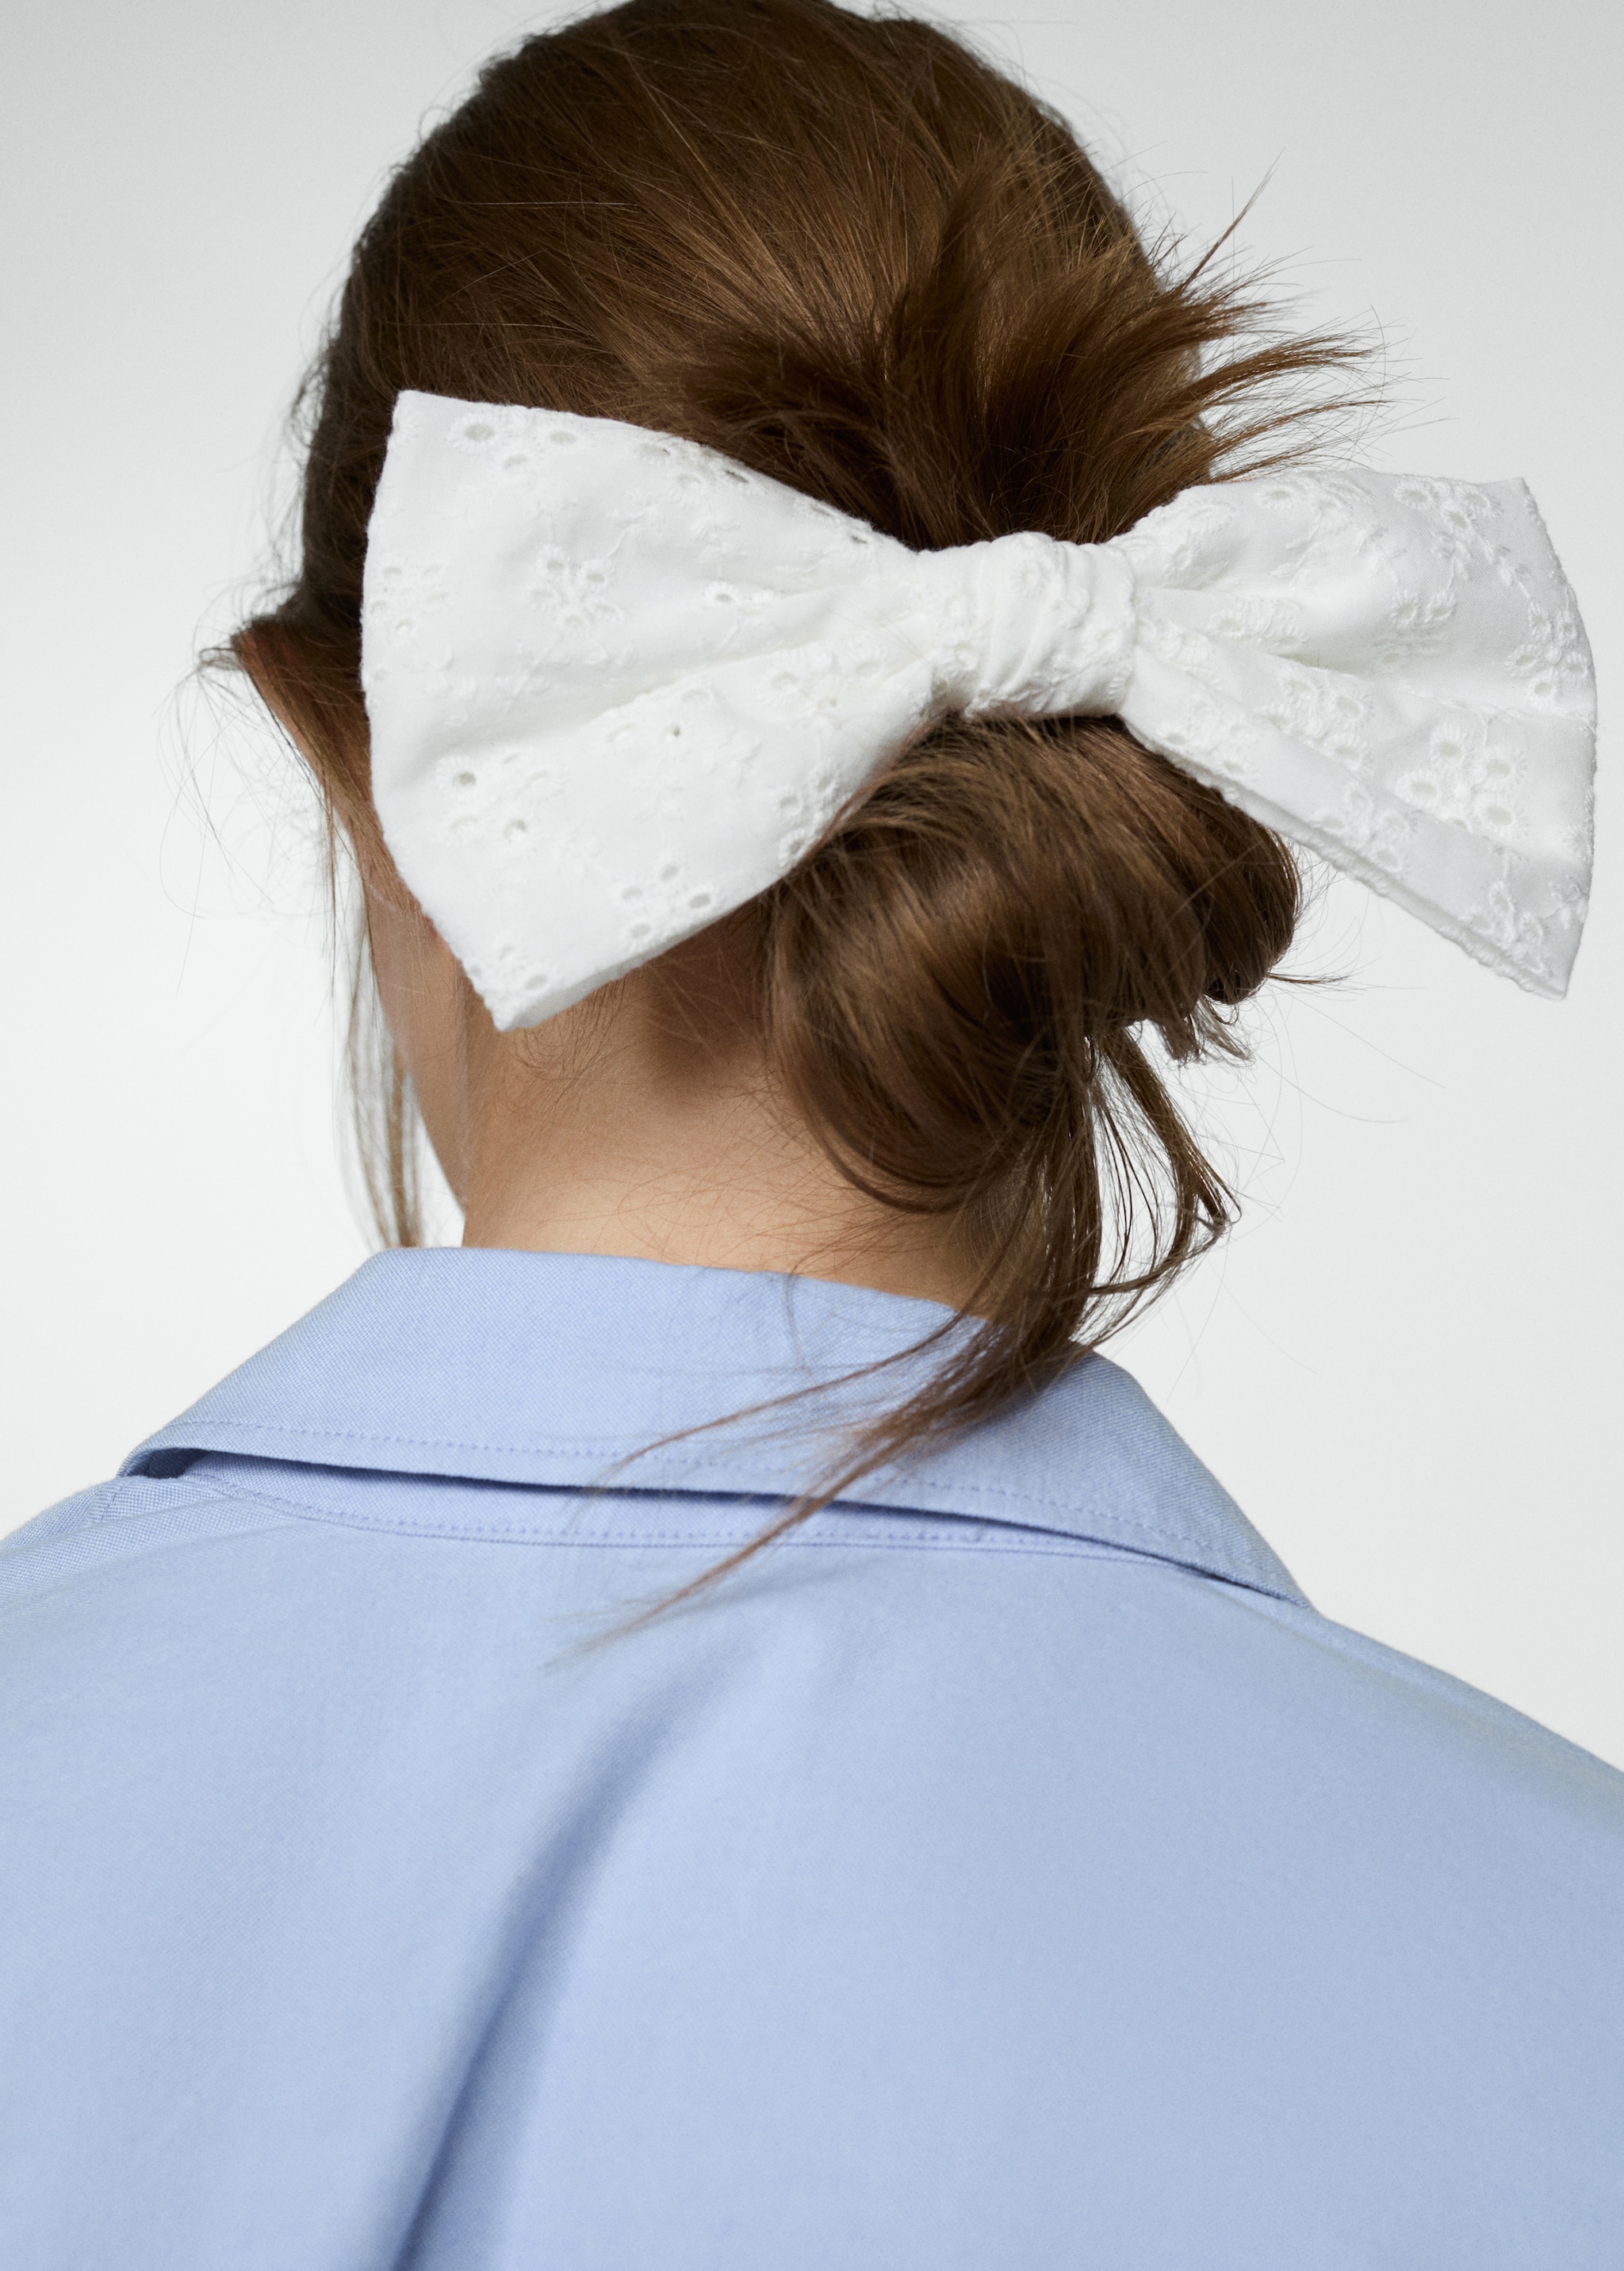 Embroidered barrette with bow - General plane